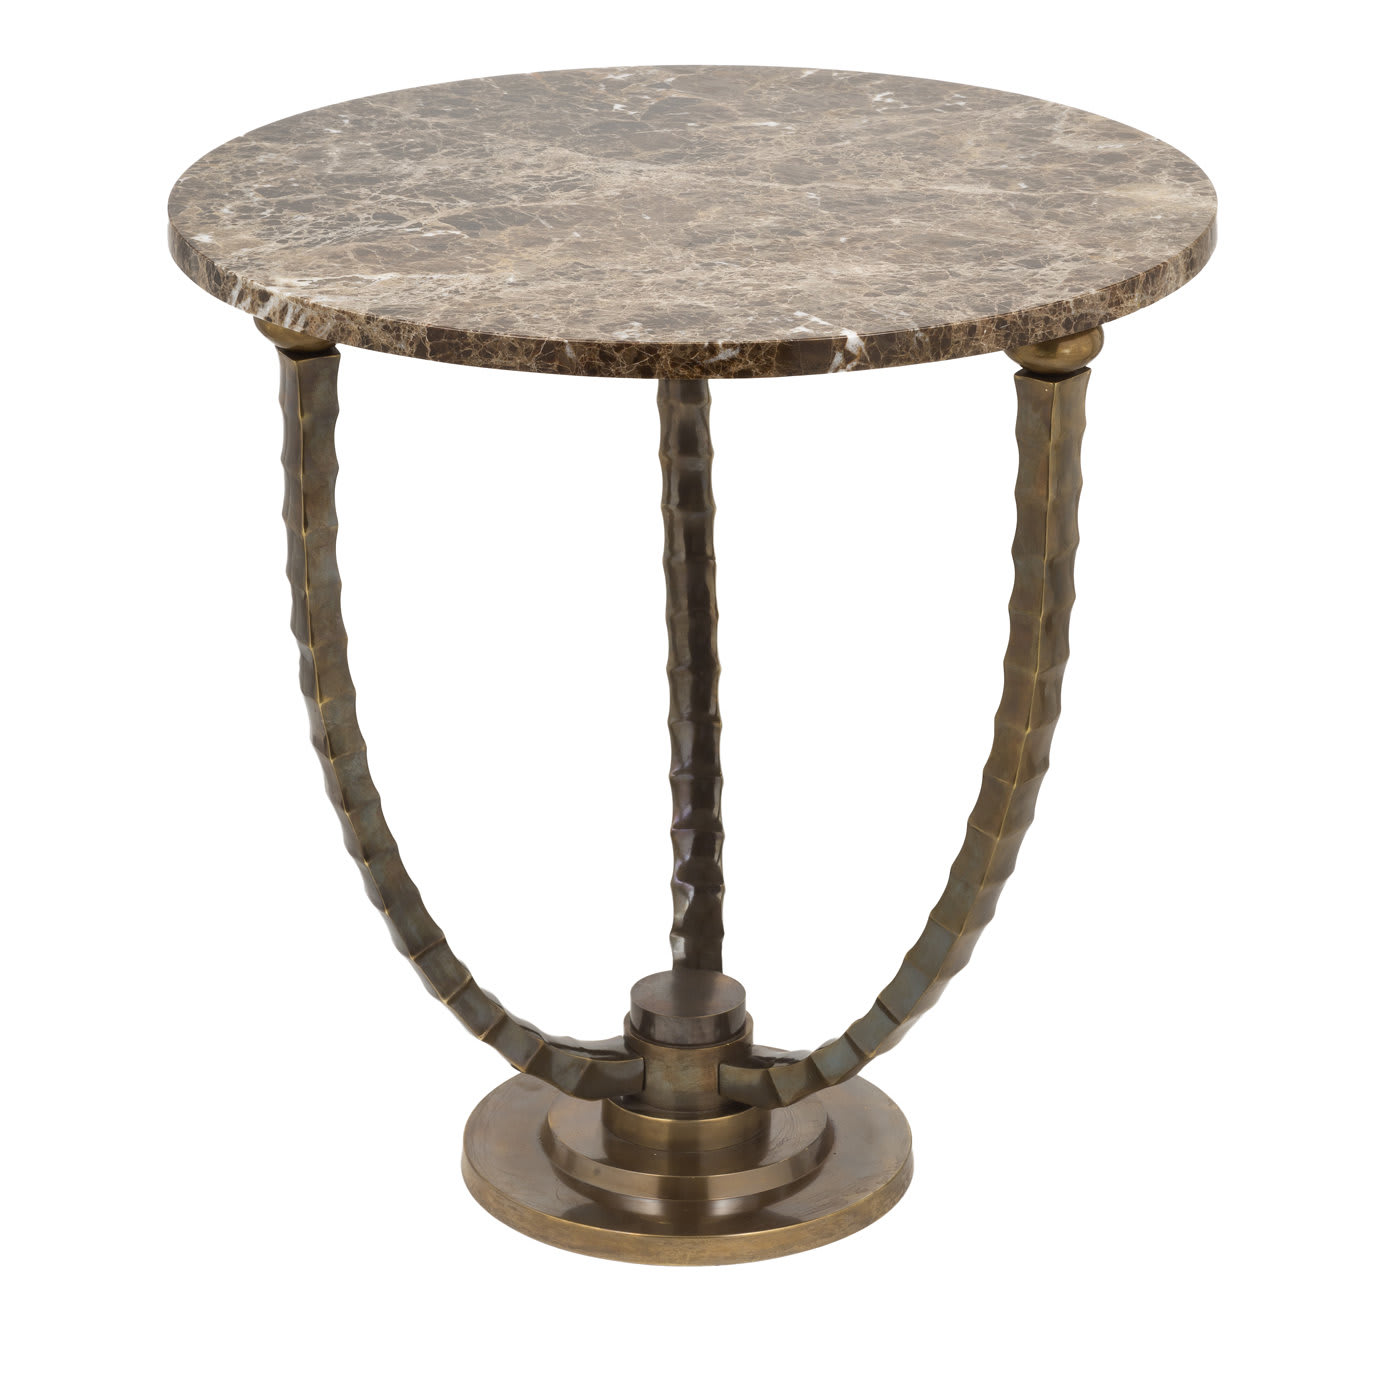 Horn 1 Table with Emperador Marble - Bronzetto